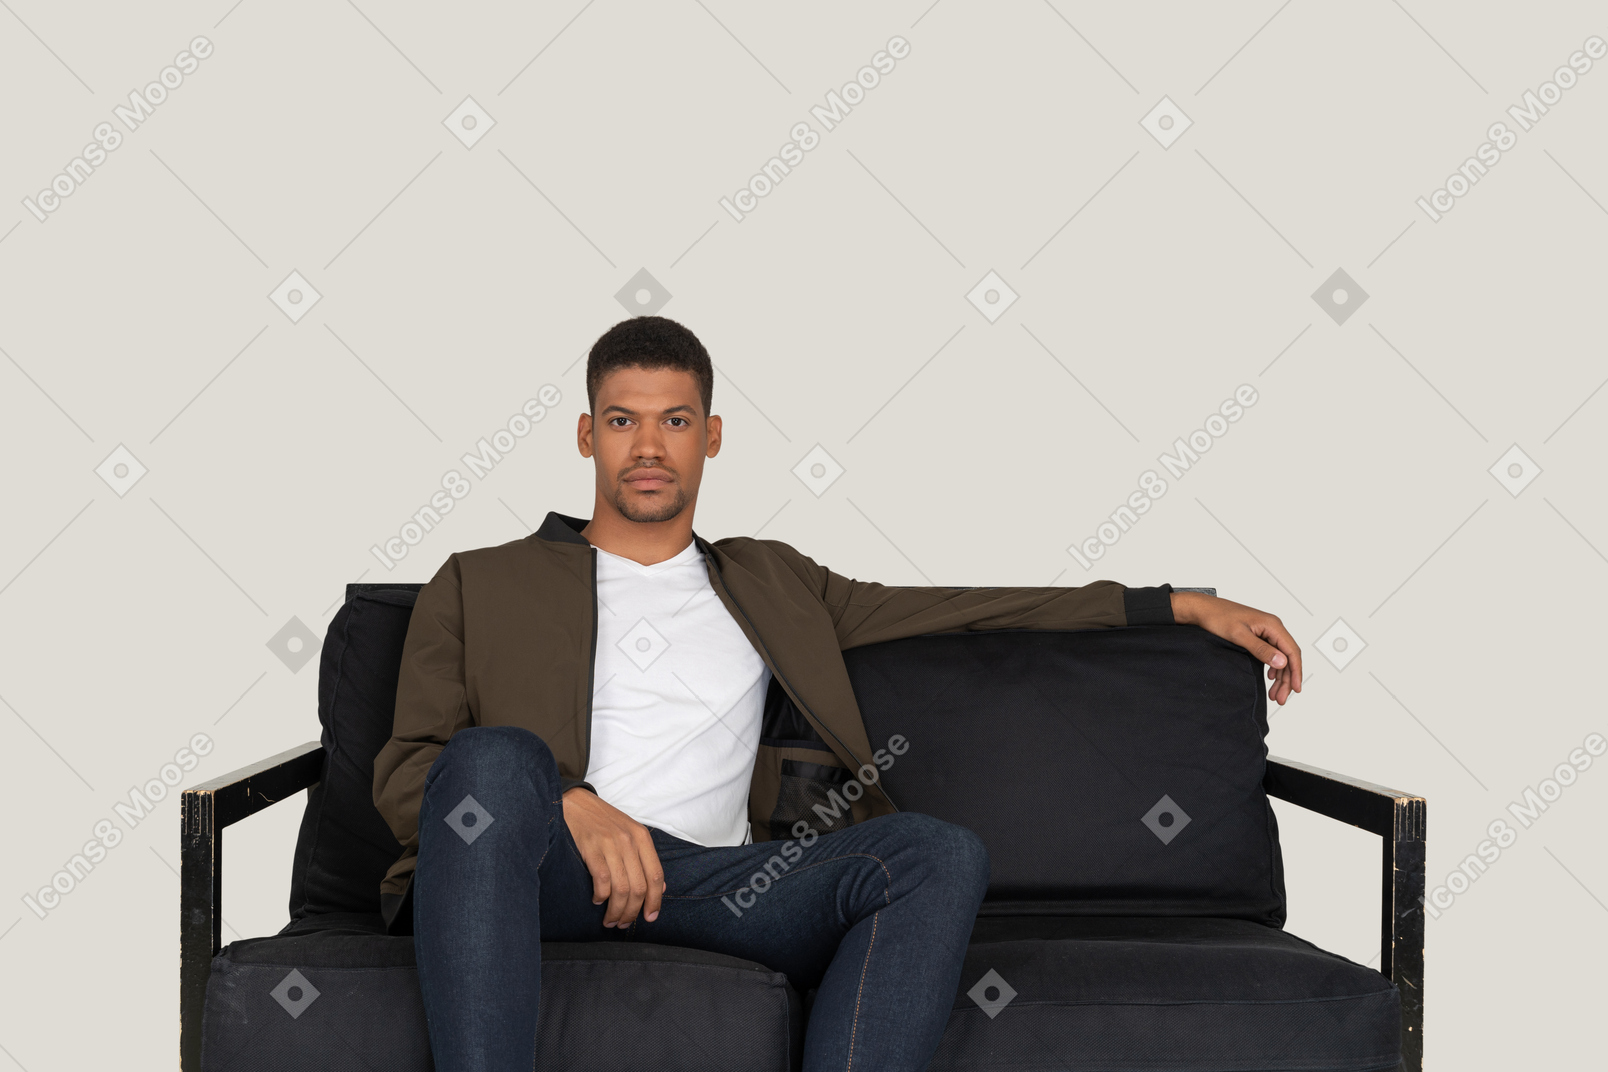 Smiling young man sitting on the sofa